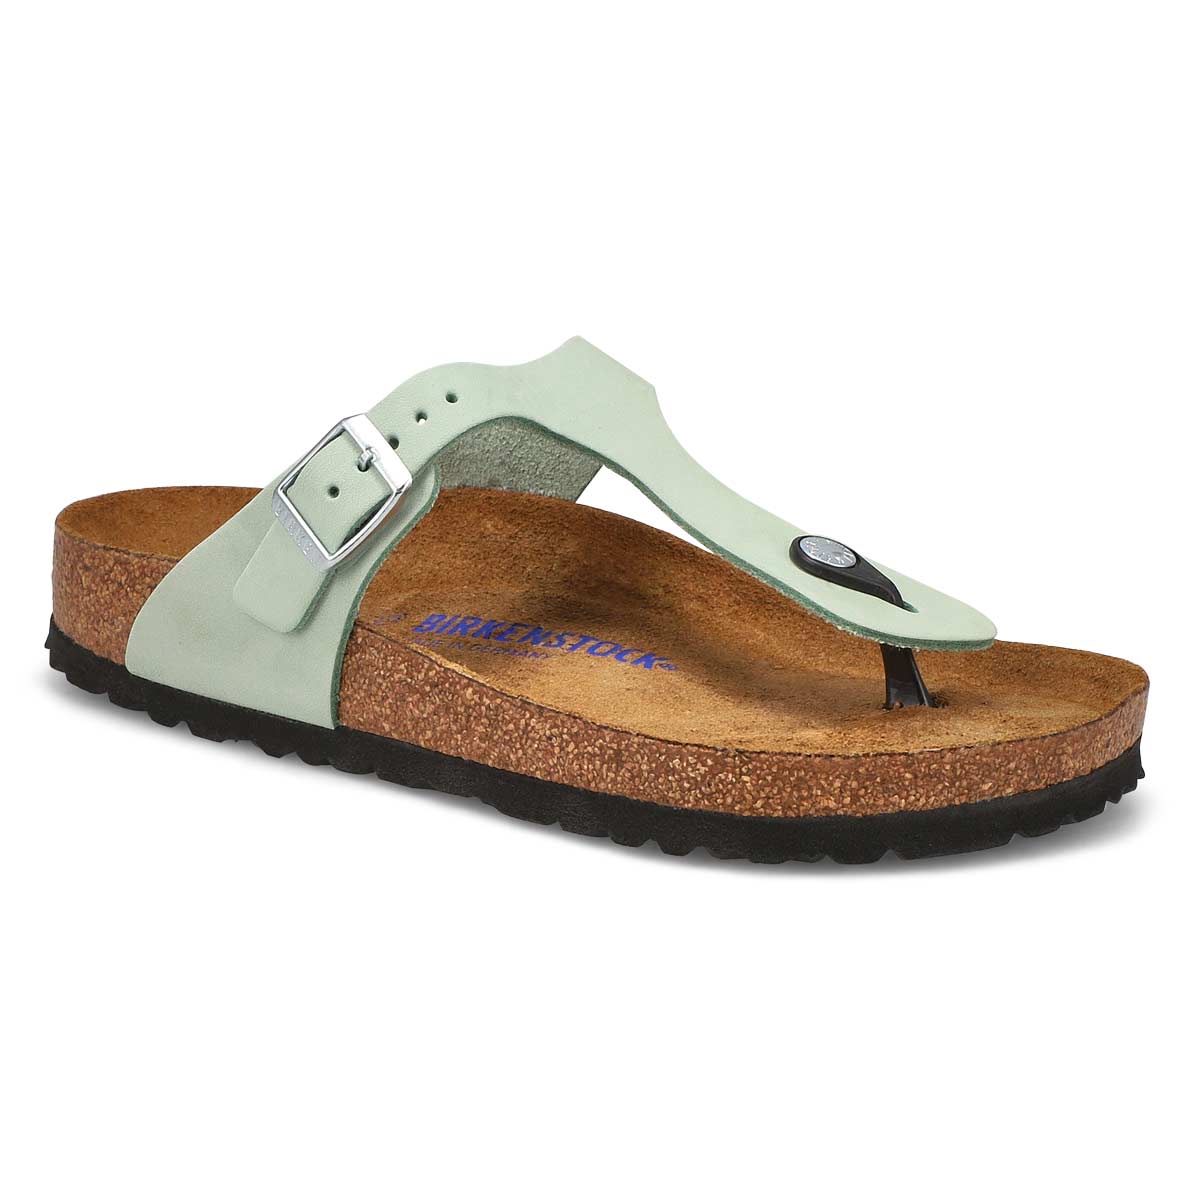 Birkenstock Women's Gizeh Oiled Leather Thong